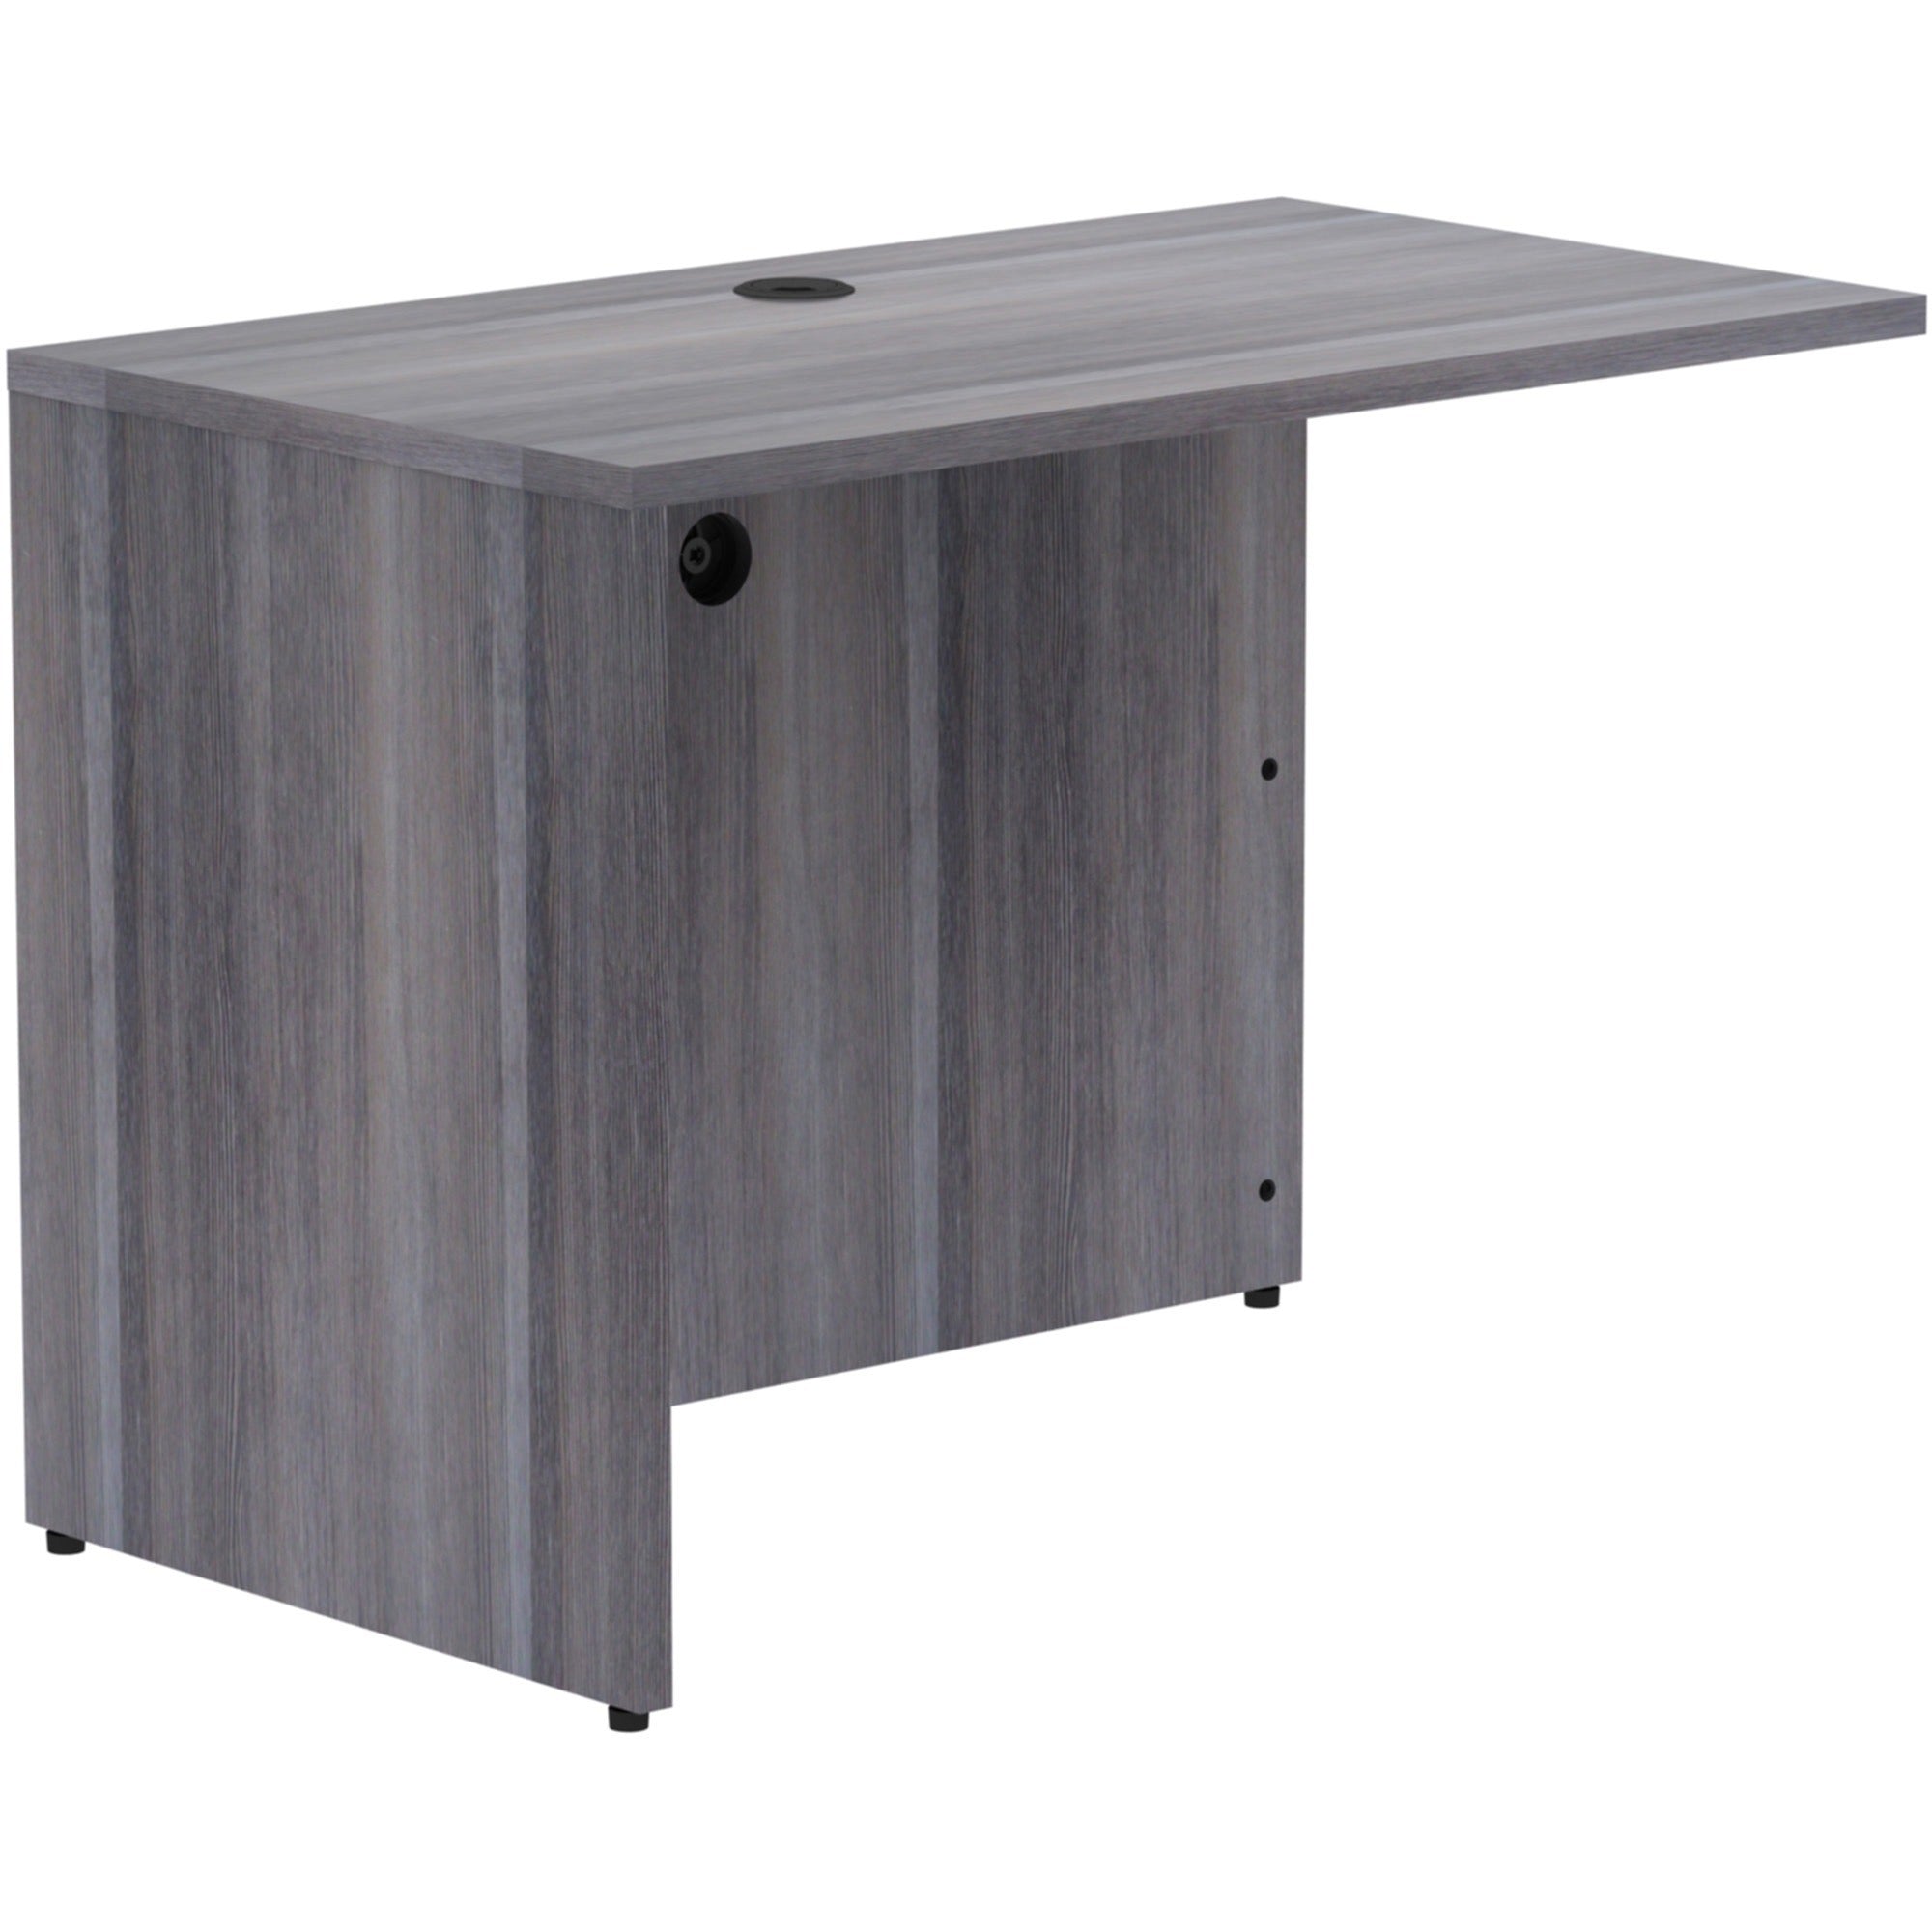 lorell-essentials-series-return-shell-42-x-24295--1-top-laminate-weathered-charcoal-table-top-modesty-panel_llr69555 - 5